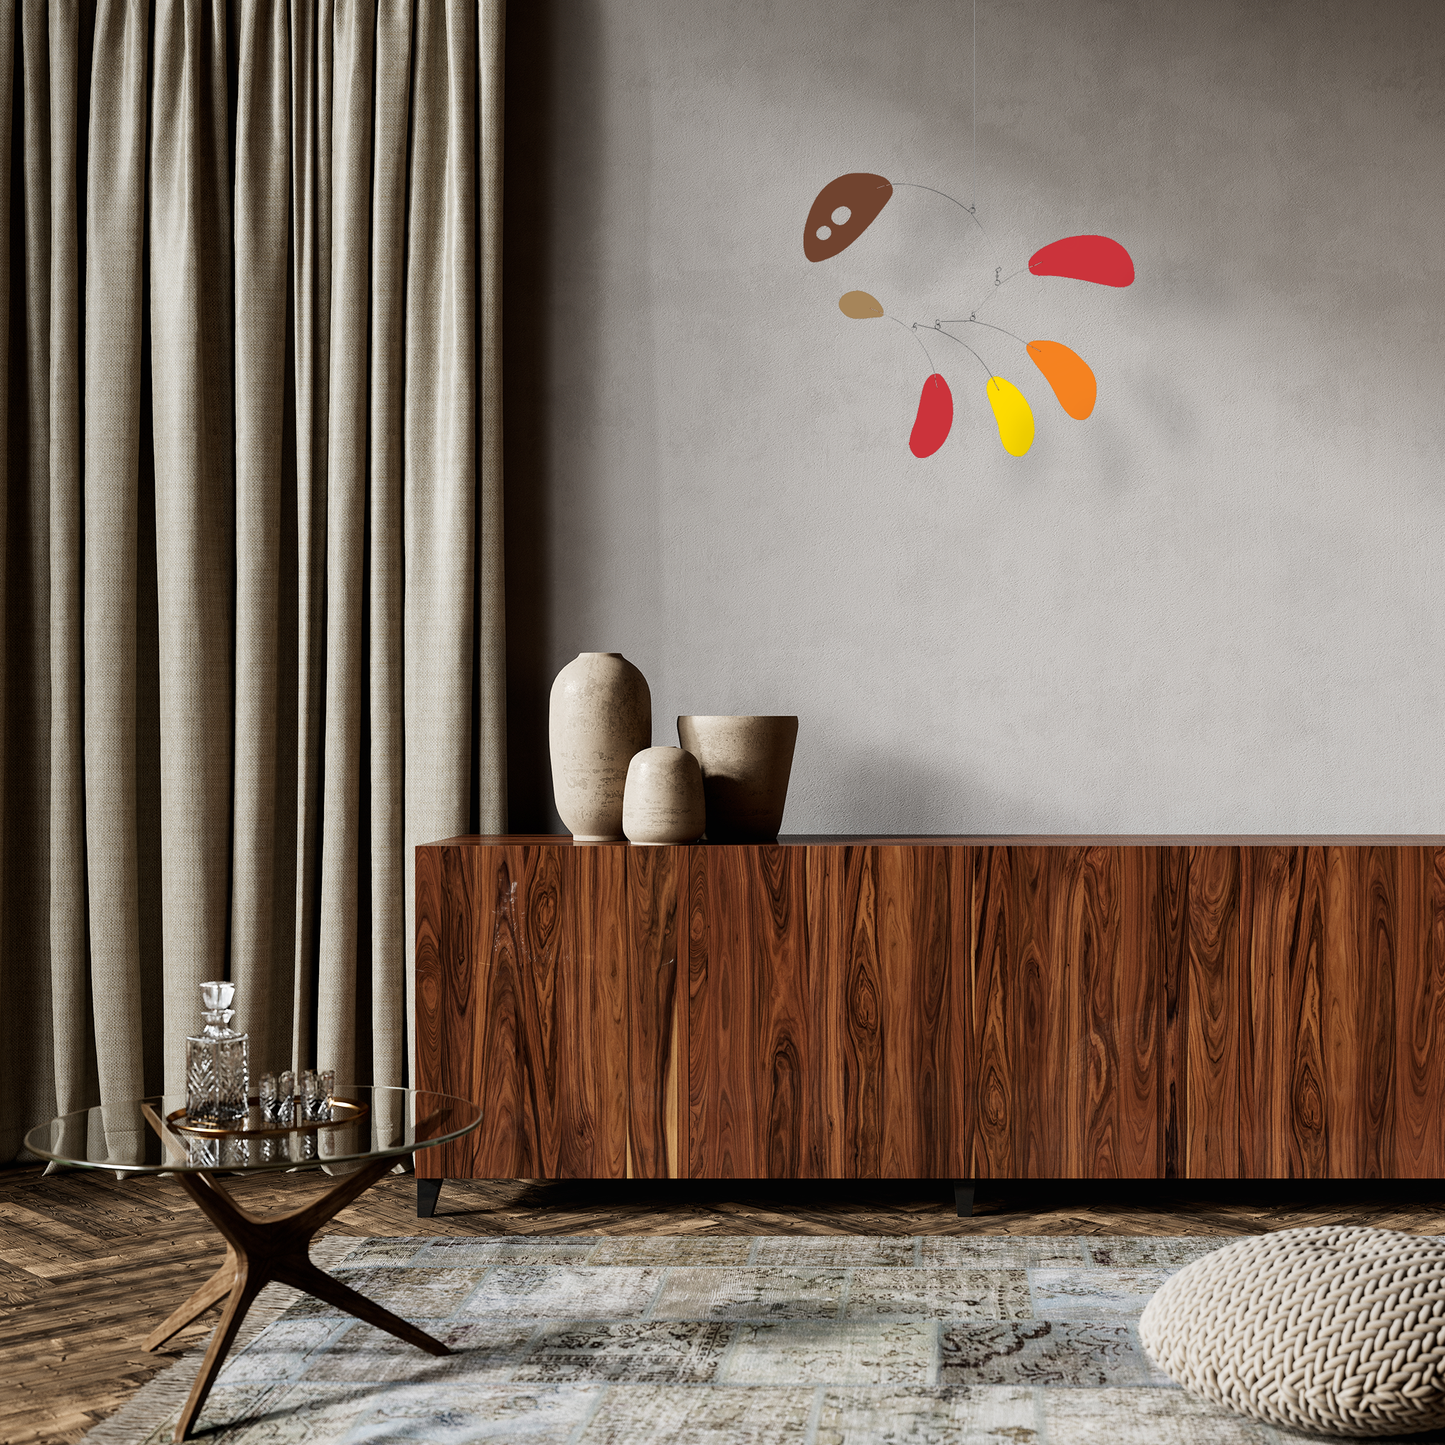 Stunning mid century modern room with wood sideboard credenza, modern glass side table, pillow, drapes and rug with AstroCats hanging art mobile in Fall Colors of brown, red, orange, yellow, and latte by AtomicMobiles.com